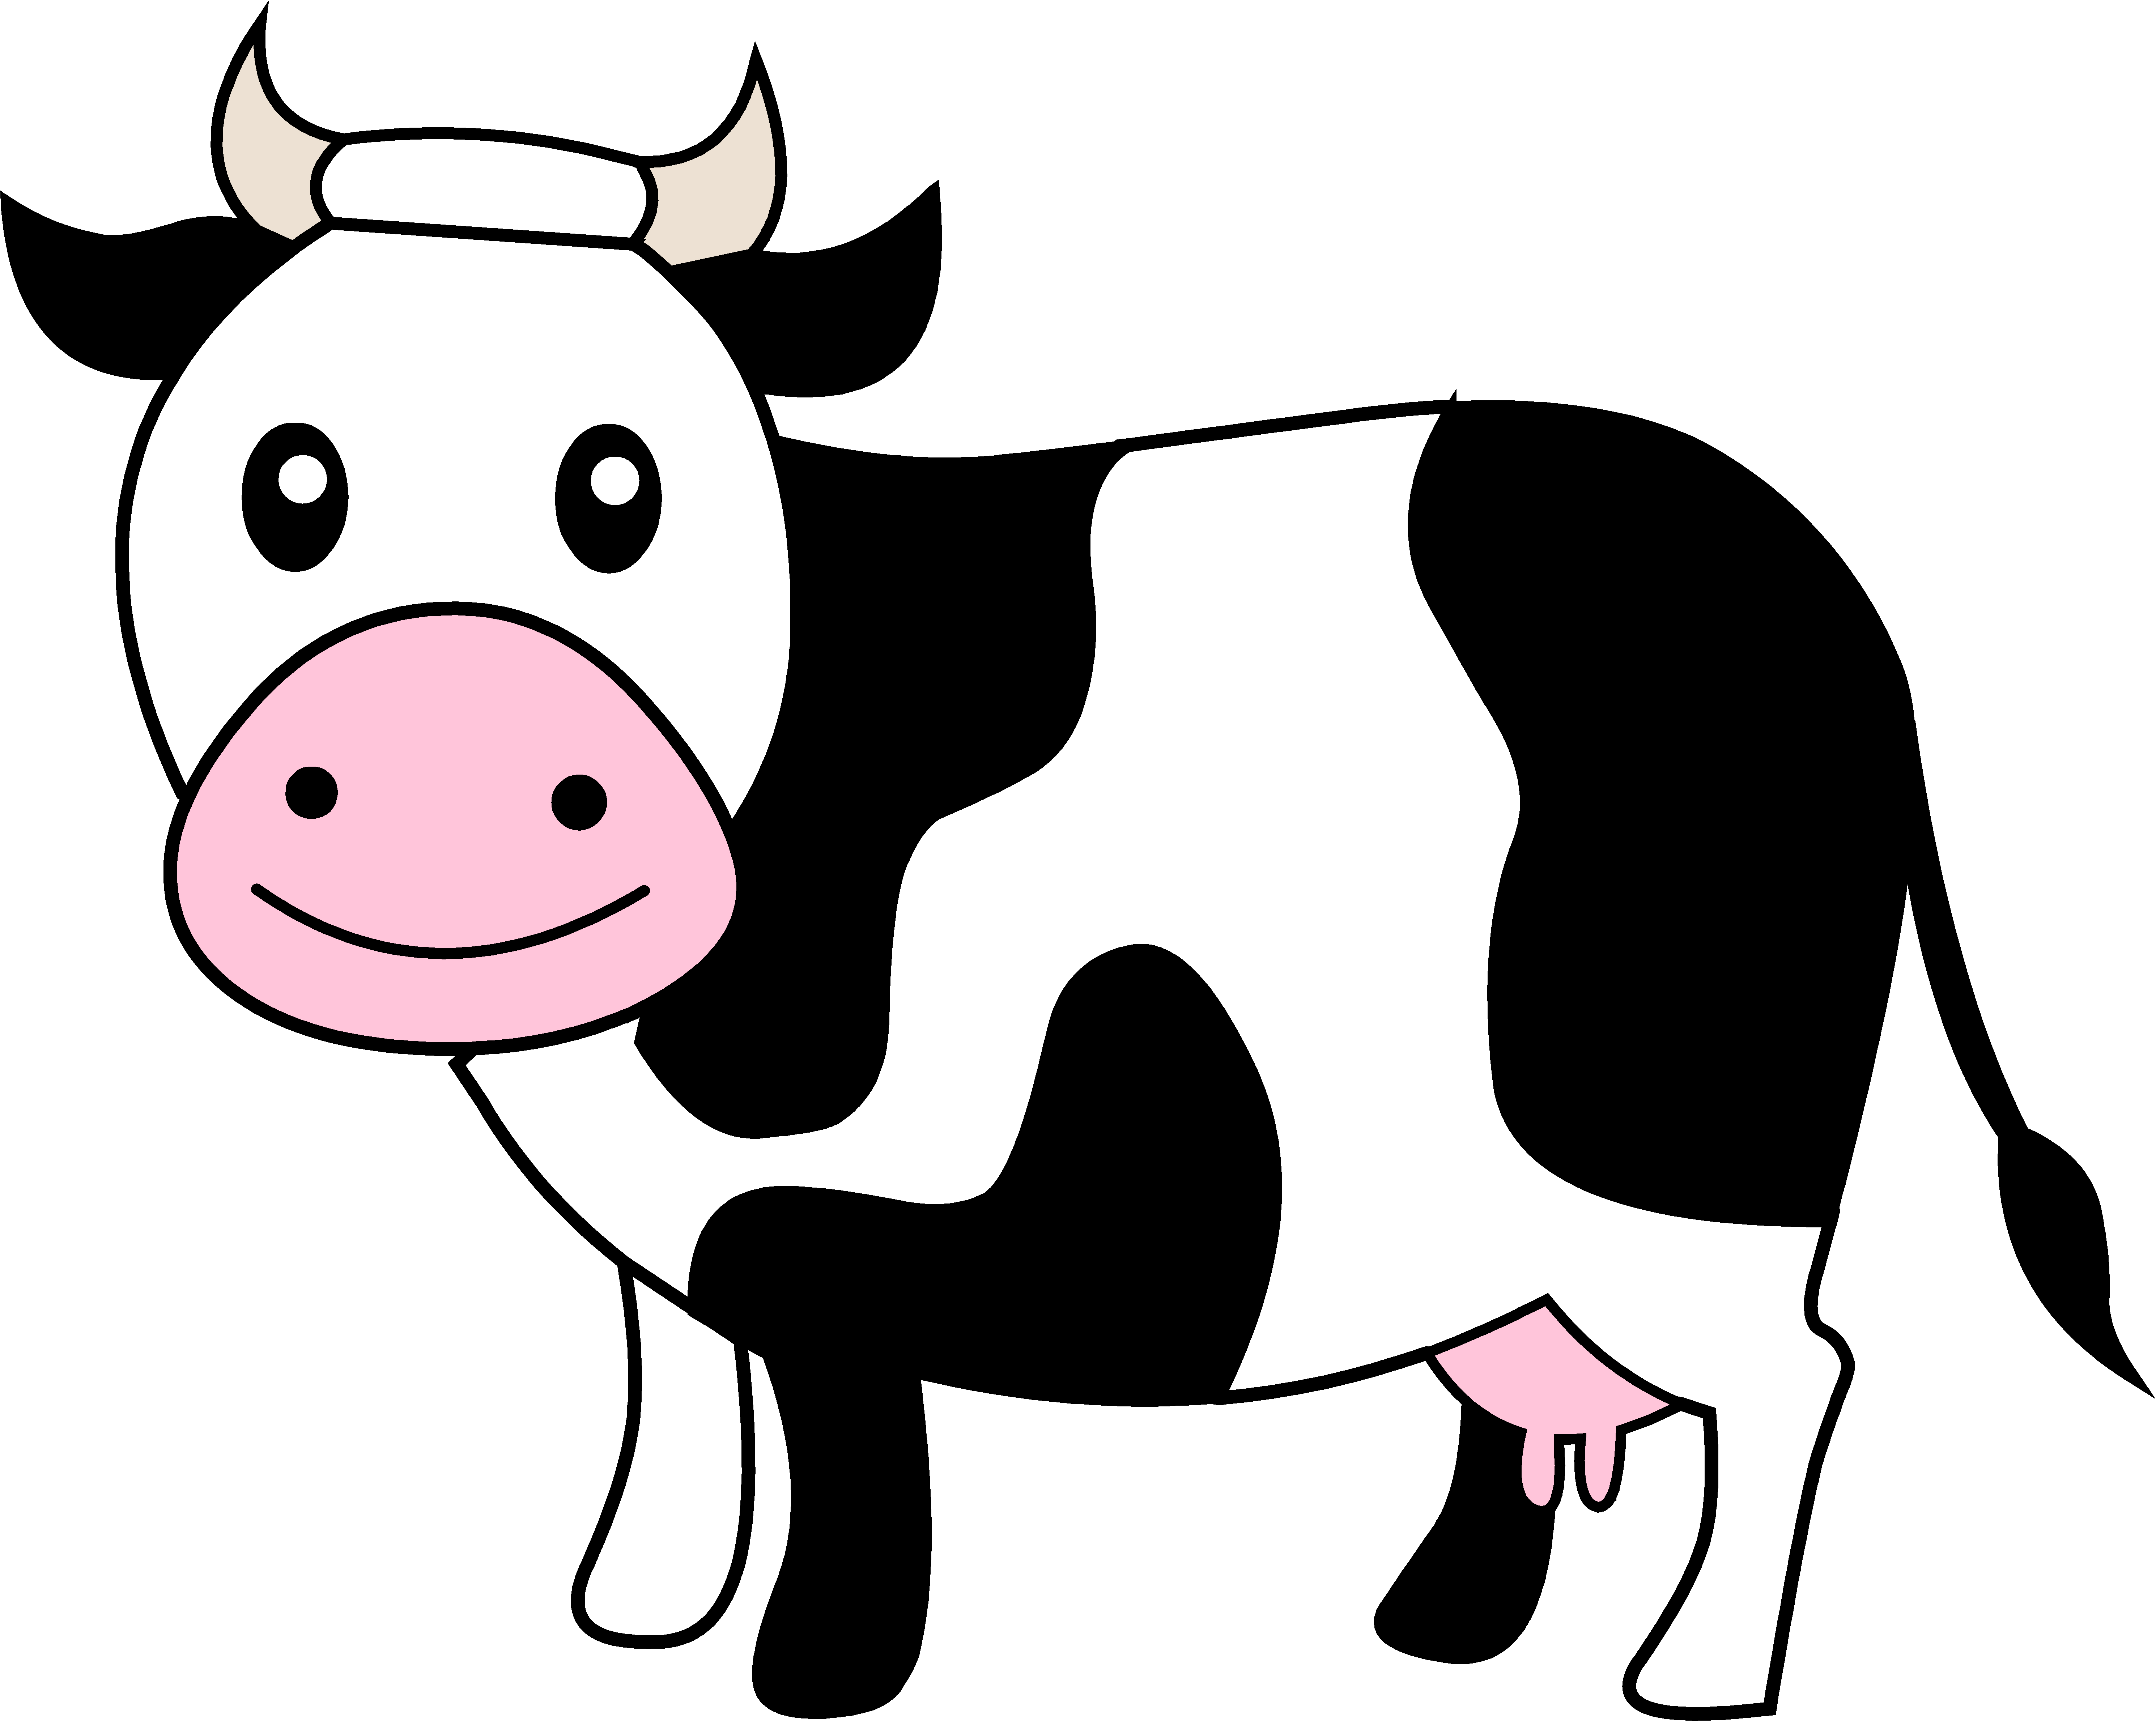 Clipart free cow. Clip art embroidery needle